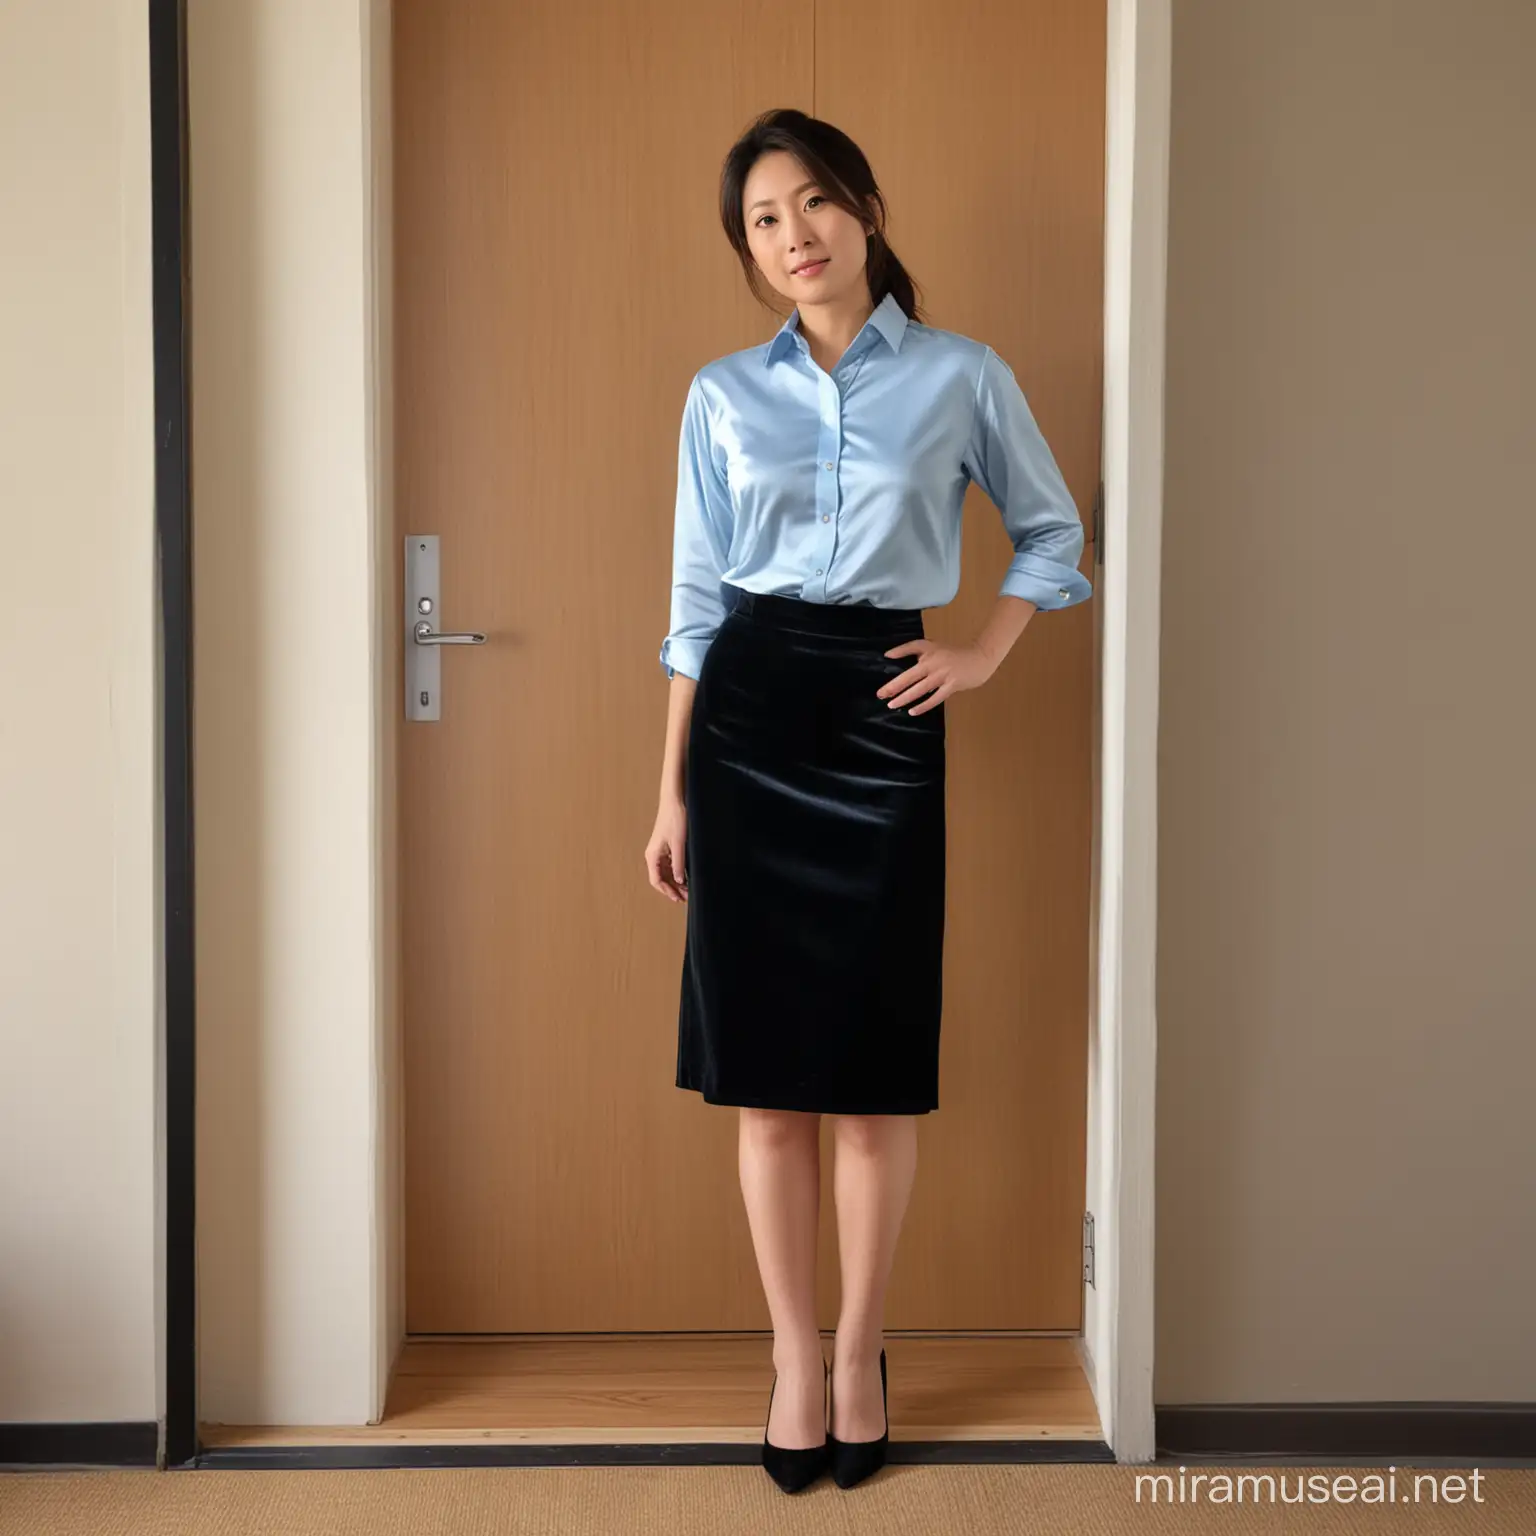 40 years old Japanese woman wearing light blue silk shirt and black velvet pencil skirt standing in a doorway. Full length view.